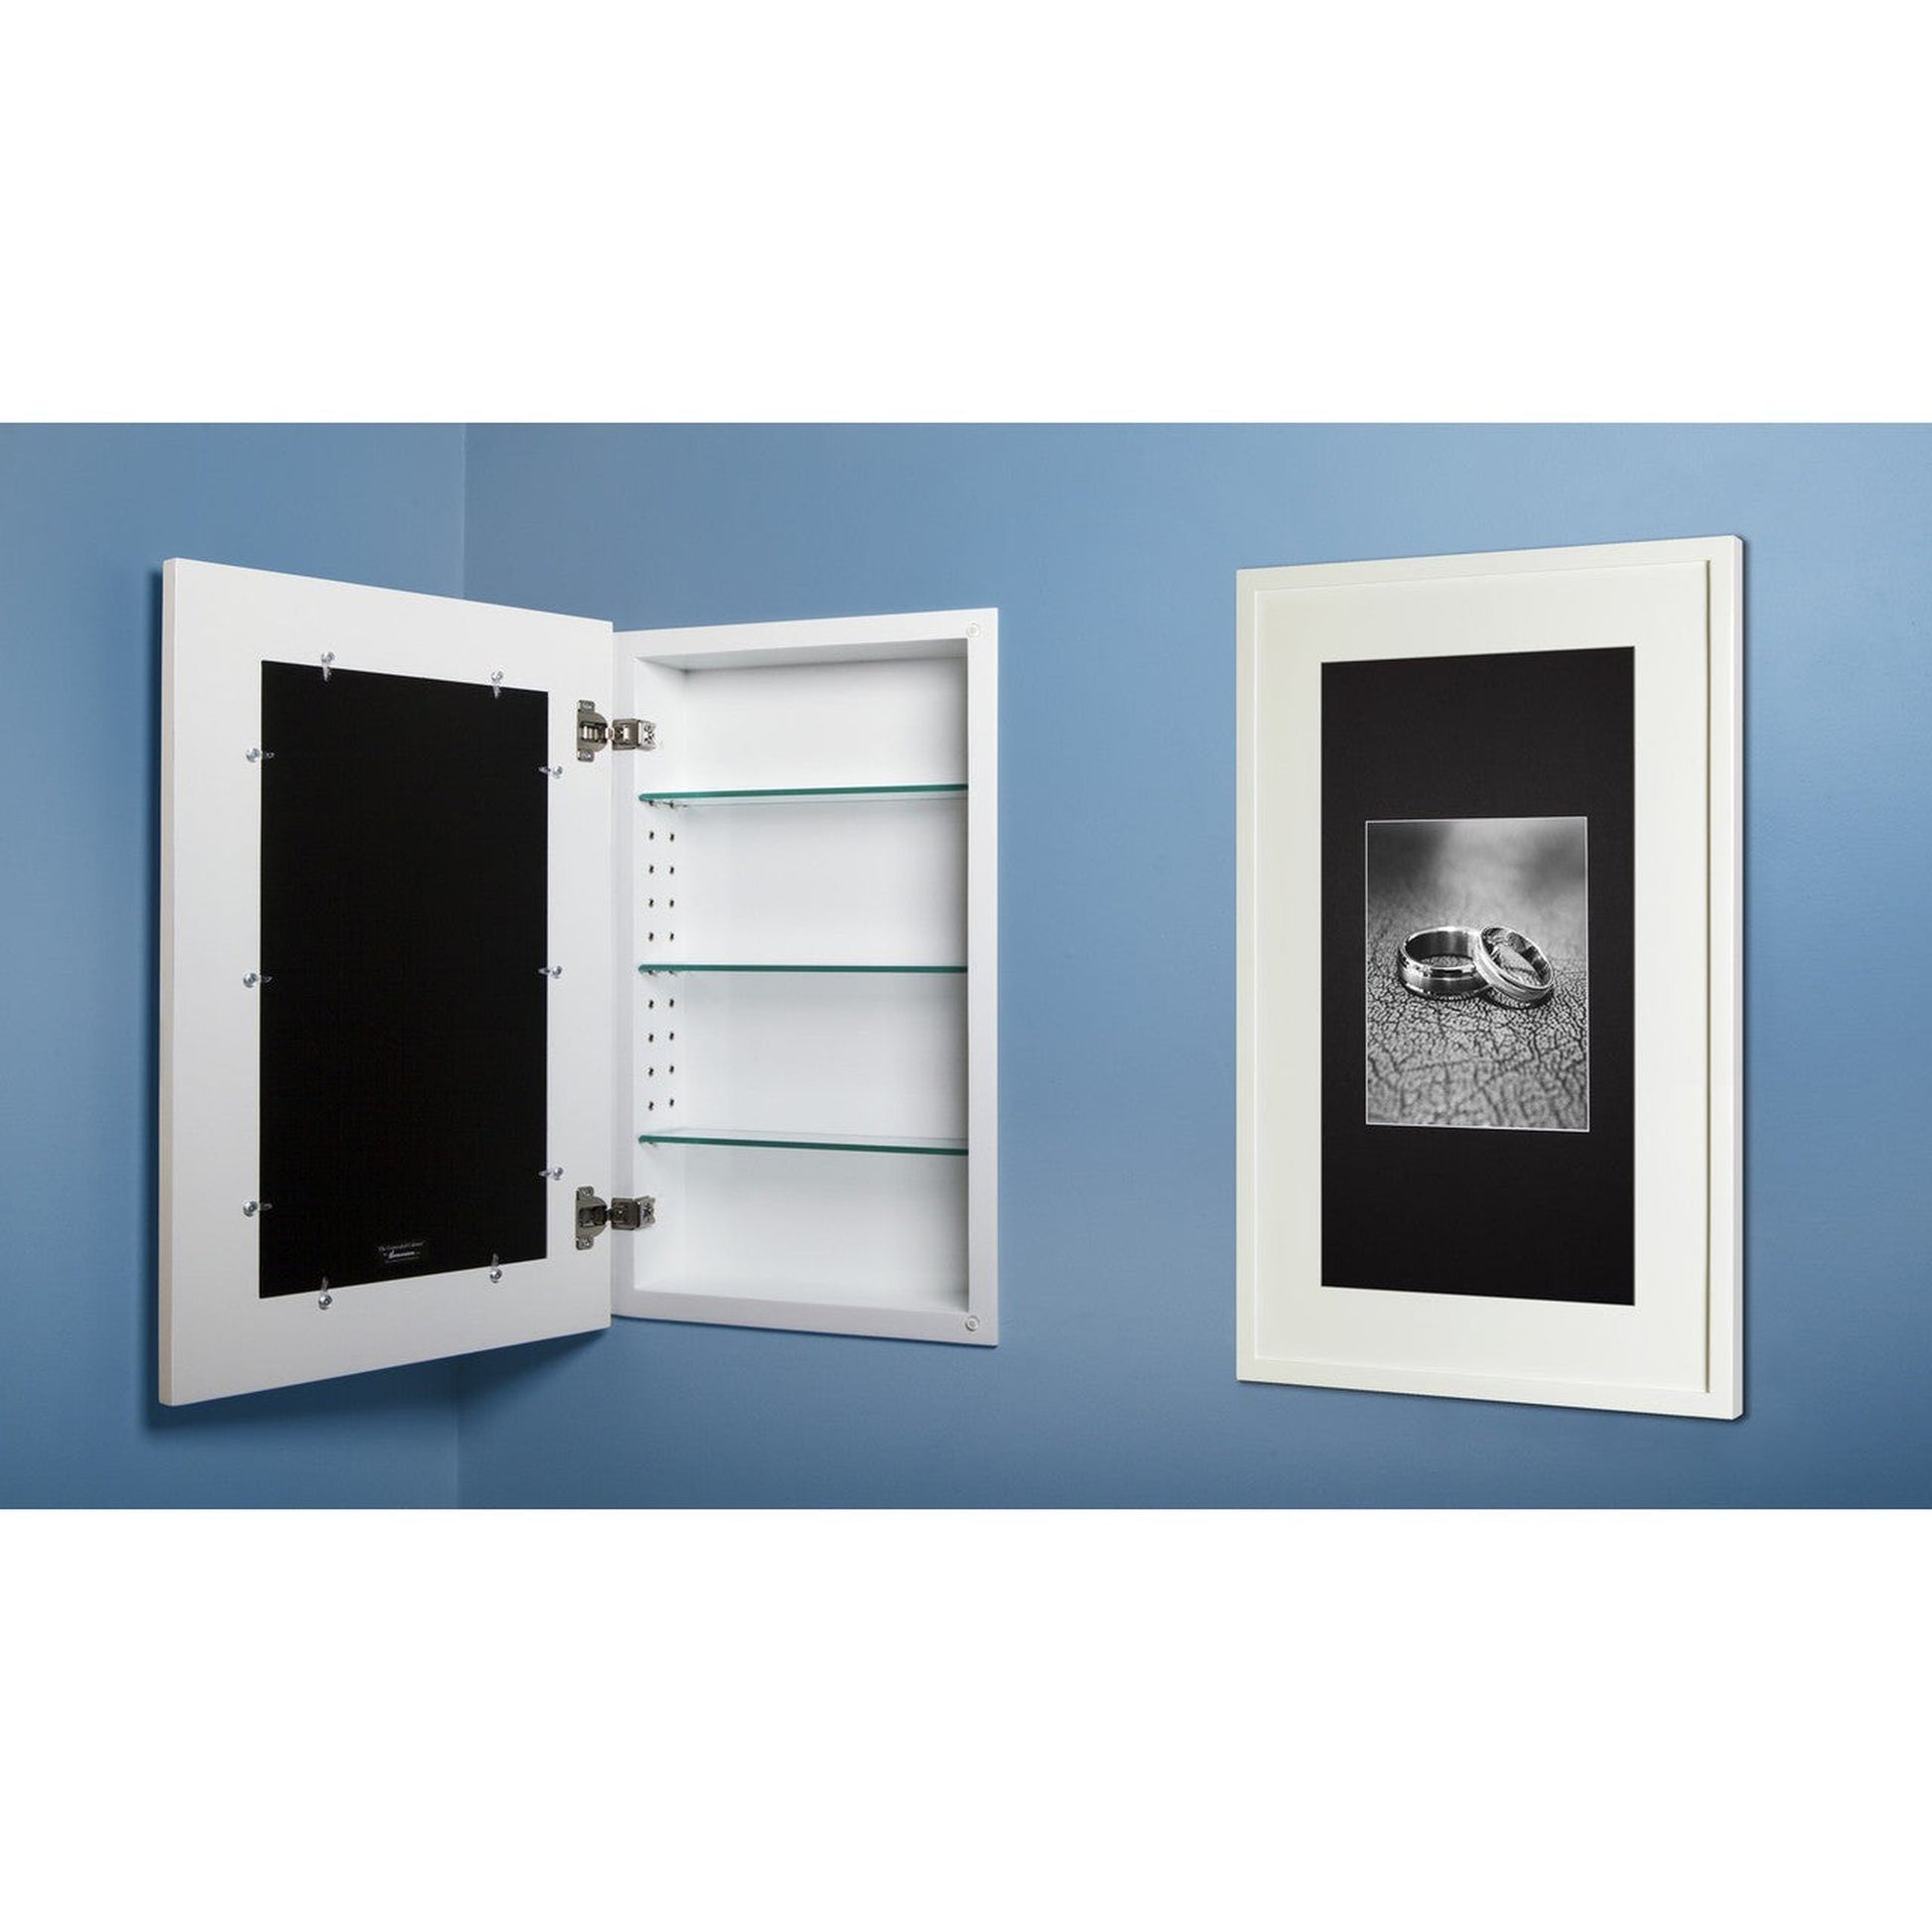 Fox Hollow Furnishings 14" x 24" White Extra Large Contemporary Special 3" Depth White Interior Recessed Picture Frame Medicine Cabinet With Mirror and Black Matting